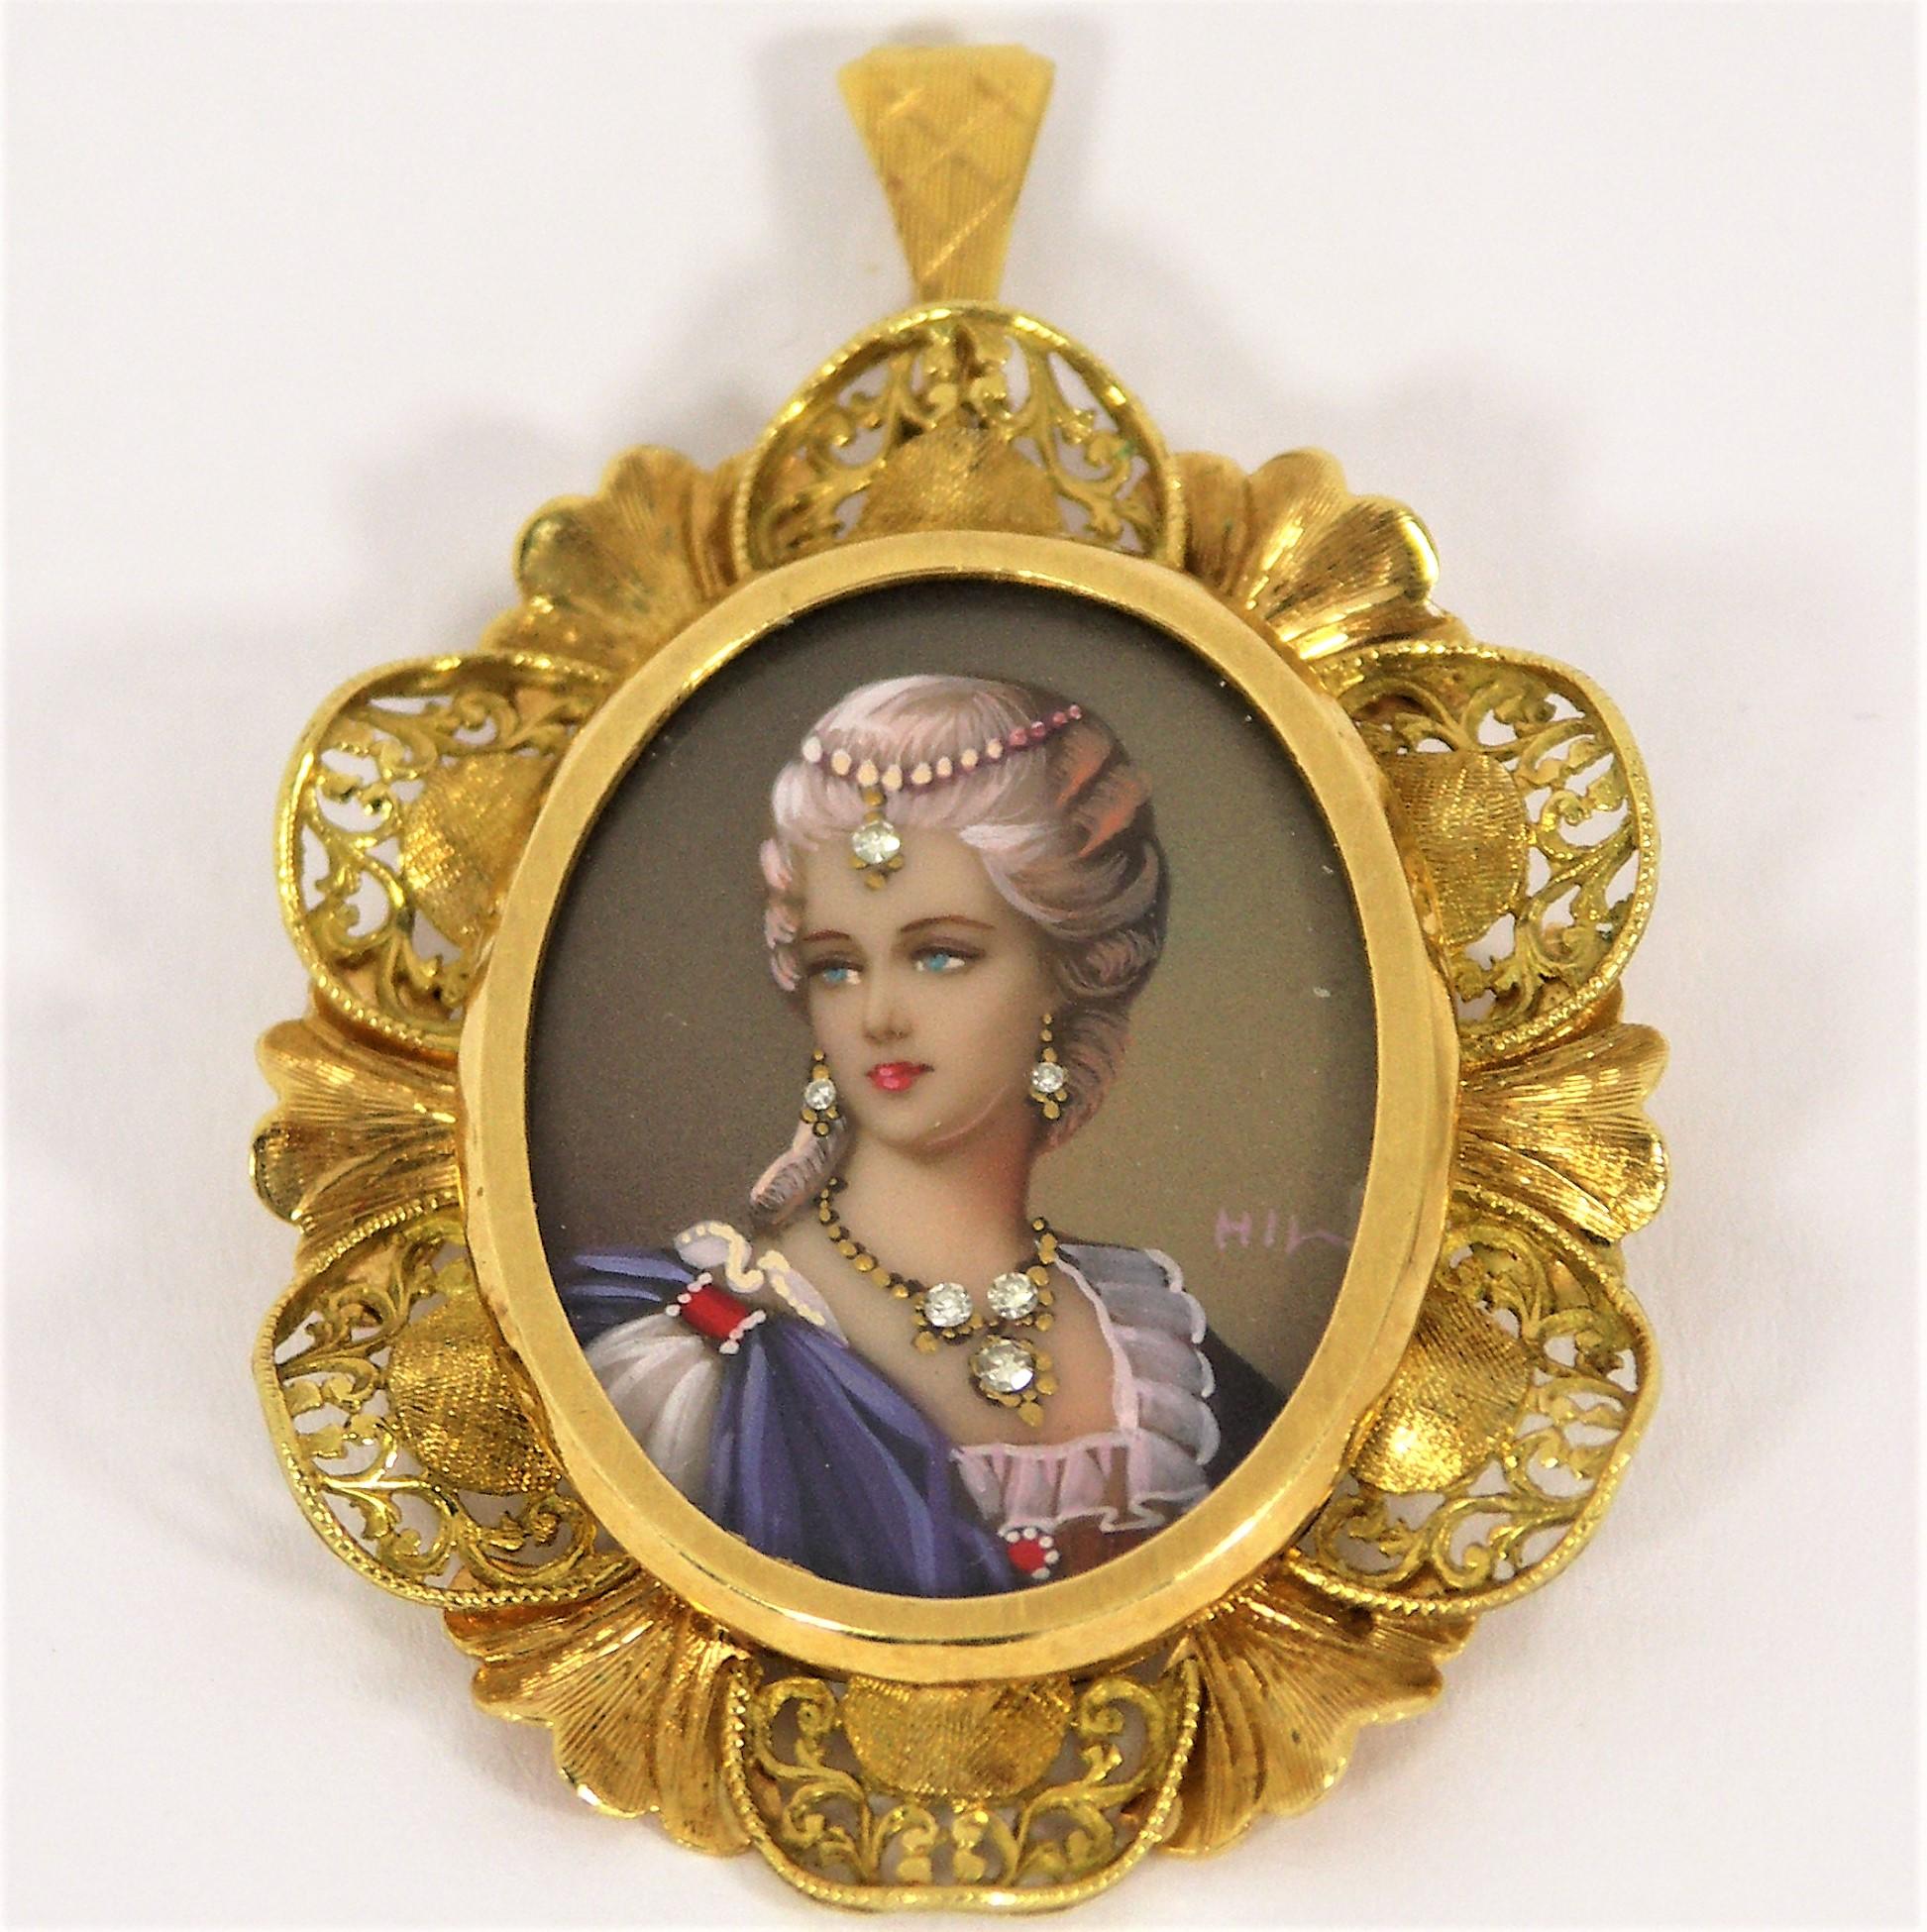 Made in the 1950s, this elegant 18K gold hand painted portrait pendant/brooch
shows the model wearing a diamond necklace, diamond earrings and a diamond headband. The six single cut diamonds weigh an approximate total of .05ct .
The lacy gold frame